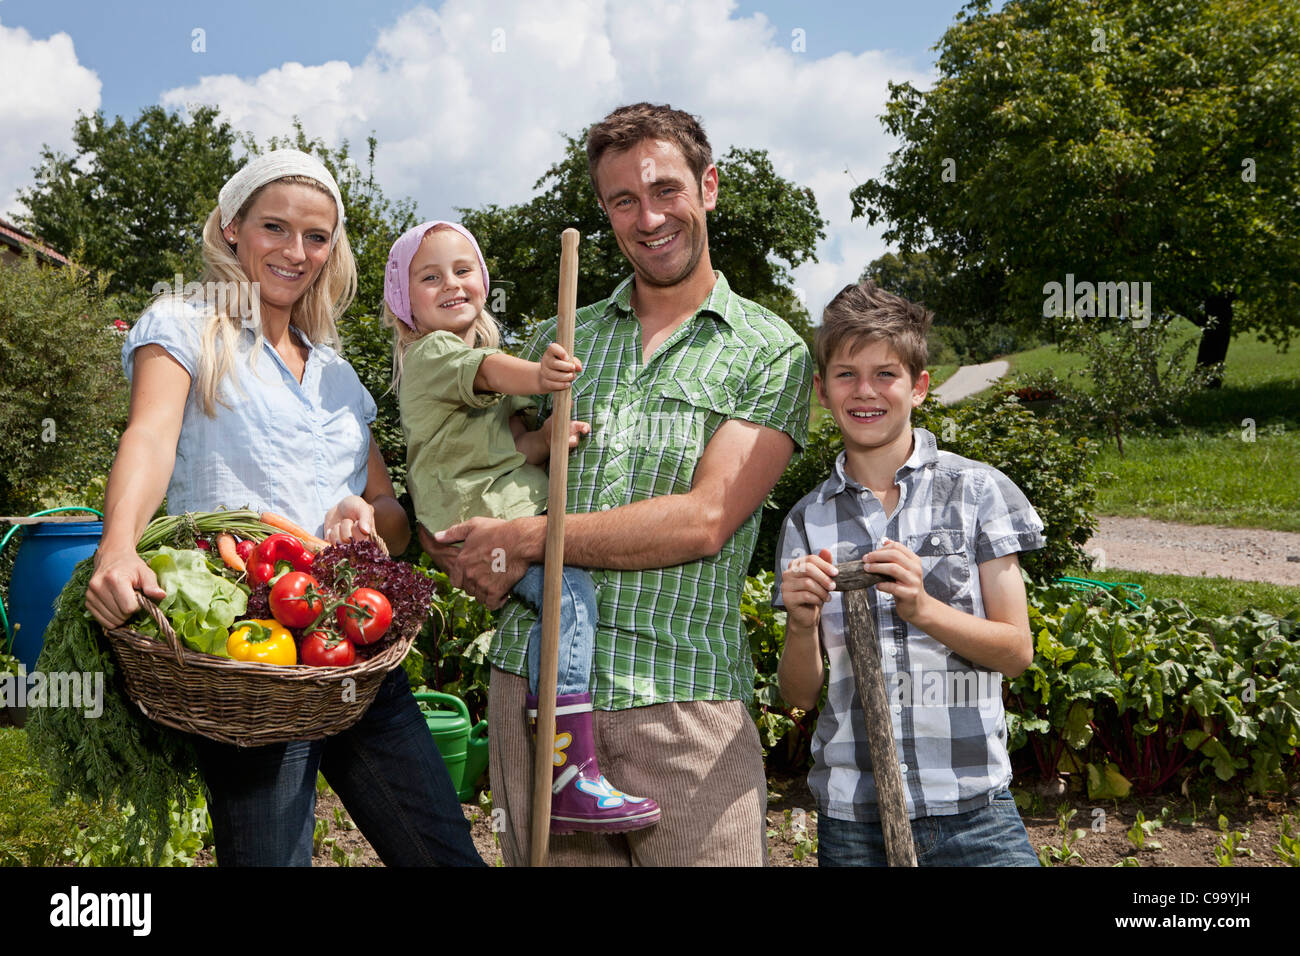 Germany, Bavaria, Altenthann, Family gardening together in garden Stock Photo